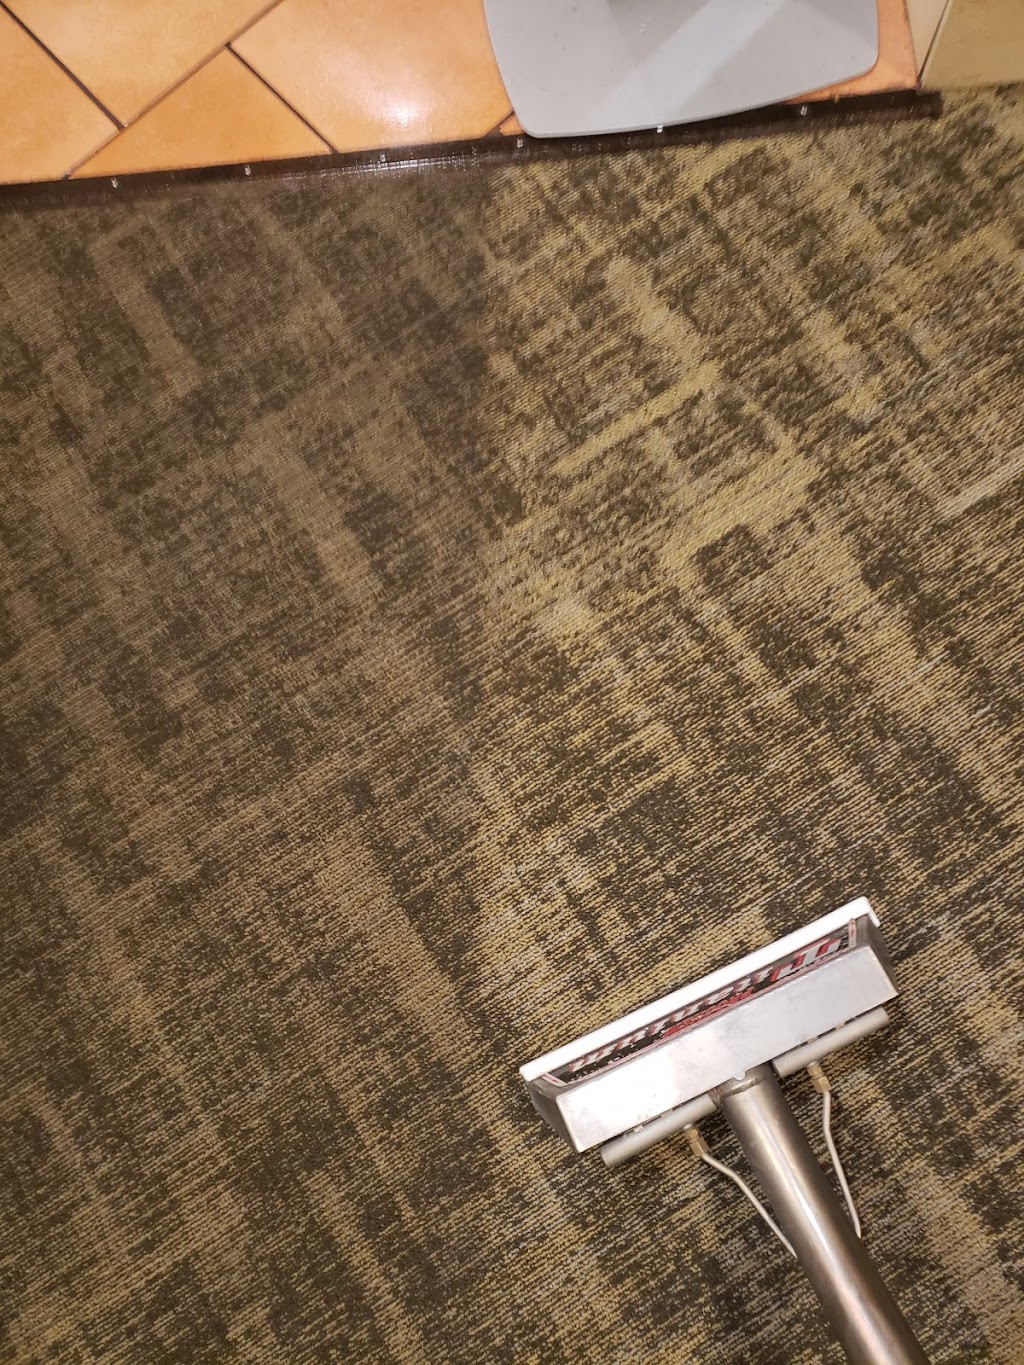 Schulers Carpet Cleaning | 7113 166th Ave E, Sumner, WA 98390 | Phone: (253) 501-7606